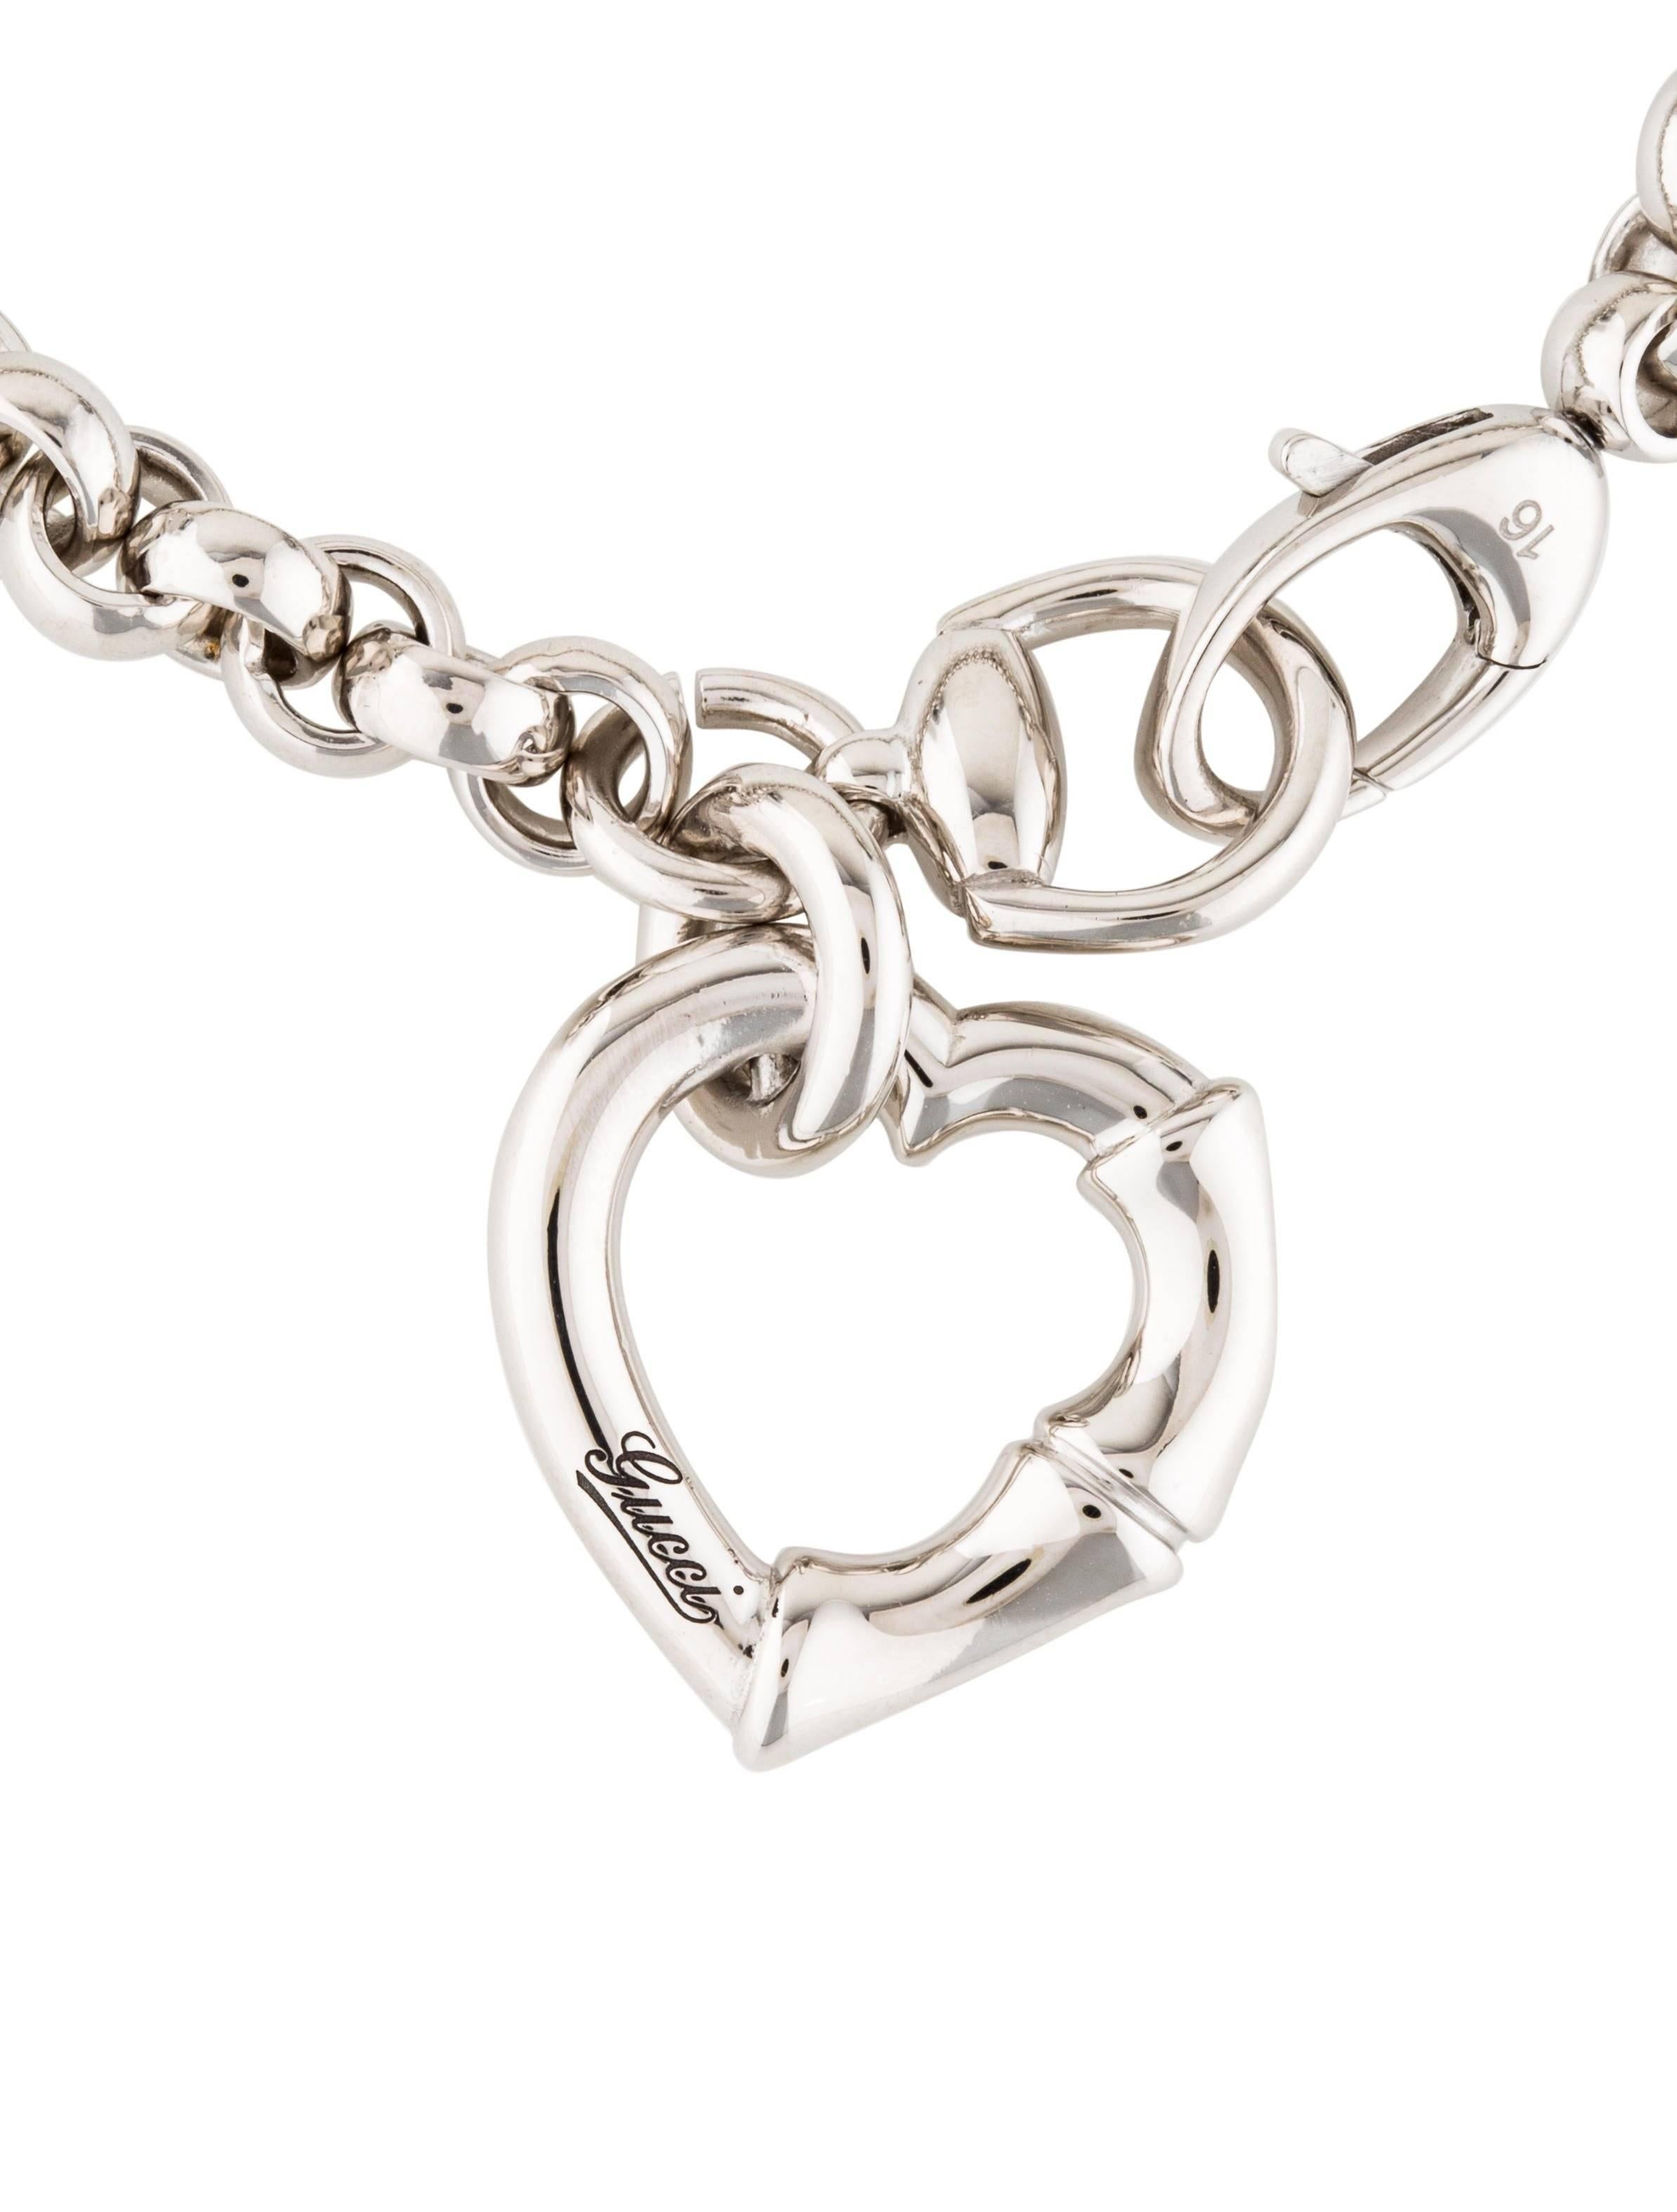 Gucci New Sterling Silver Chain Charm Bamboo Heart Bangle Bracelet in Box

Sterling silver - 925
Lobster clasp closure
Signed
Made in Italy 
Charm diameter 0.75